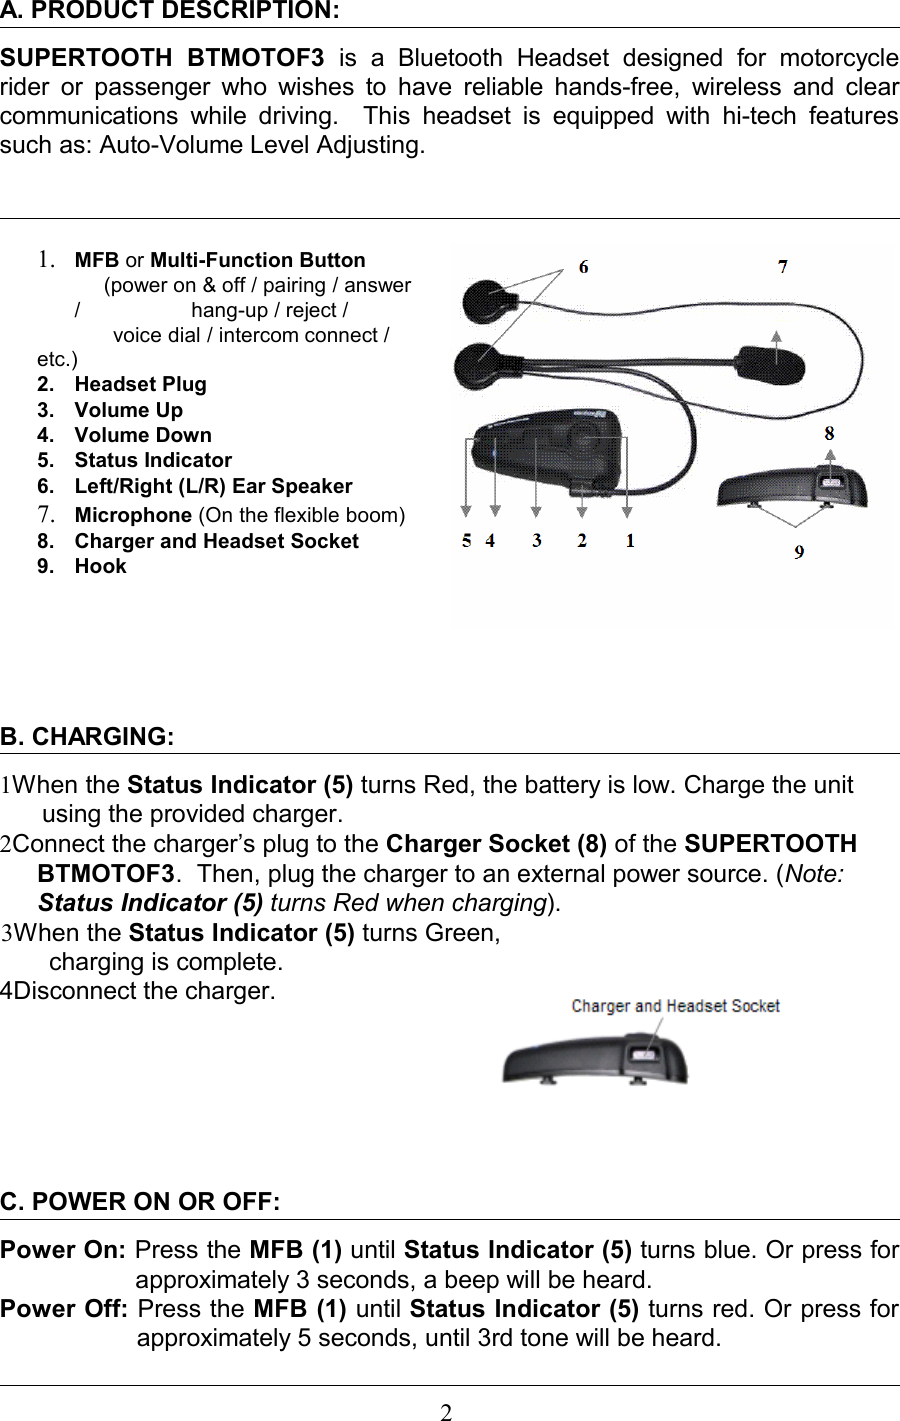 A. PRODUCT DESCRIPTION: SUPERTOOTH   BTMOTOF3  is   a   Bluetooth   Headset  designed  for   motorcycle rider or passenger who wishes to have reliable hands-free, wireless and clear communications while driving.   This  headset  is  equipped  with hi-tech features such as: Auto-Volume Level Adjusting.                                                                          1. MFB or Multi-Function Button     (power on &amp; off / pairing / answer /                   hang-up / reject /              voice dial / intercom connect / etc.)          2. Headset Plug3. Volume Up4. Volume Down5. Status Indicator6. Left/Right (L/R) Ear Speaker7. Microphone (On the flexible boom)8. Charger and Headset Socket9. Hook                 B. CHARGING:1When the Status Indicator (5) turns Red, the battery is low. Charge the unit using the provided charger.      2Connect the charger’s plug to the Charger Socket (8) of the SUPERTOOTH BTMOTOF3.  Then, plug the charger to an external power source. (Note: Status Indicator (5) turns Red when charging).3When the Status Indicator (5) turns Green,         charging is complete.4Disconnect the charger.C. POWER ON OR OFF:Power On: Press the MFB (1) until Status Indicator (5) turns blue. Or press for approximately 3 seconds, a beep will be heard.Power Off: Press the MFB (1) until Status Indicator (5) turns red. Or press for approximately 5 seconds, until 3rd tone will be heard.                                                                    2 